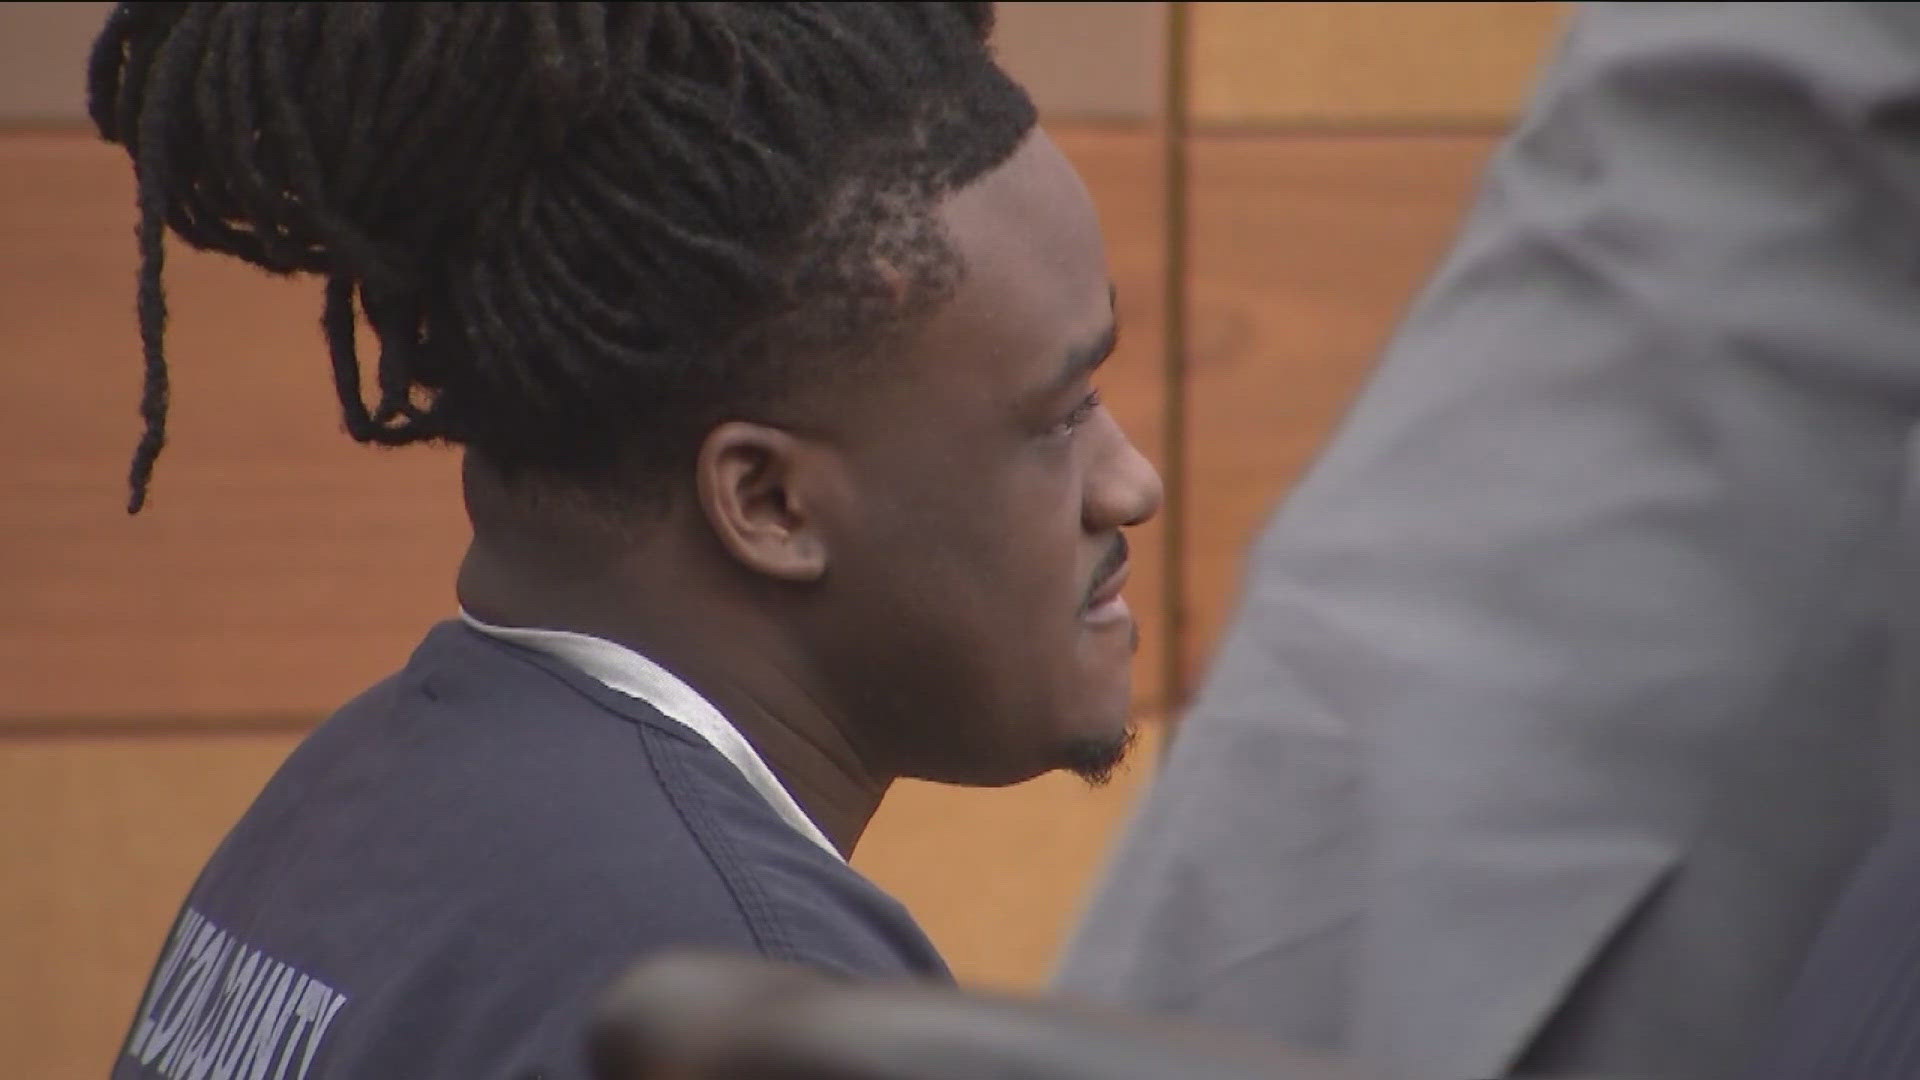 Today a judge determined there was probable cause to pursue a case against Karanji Reese.